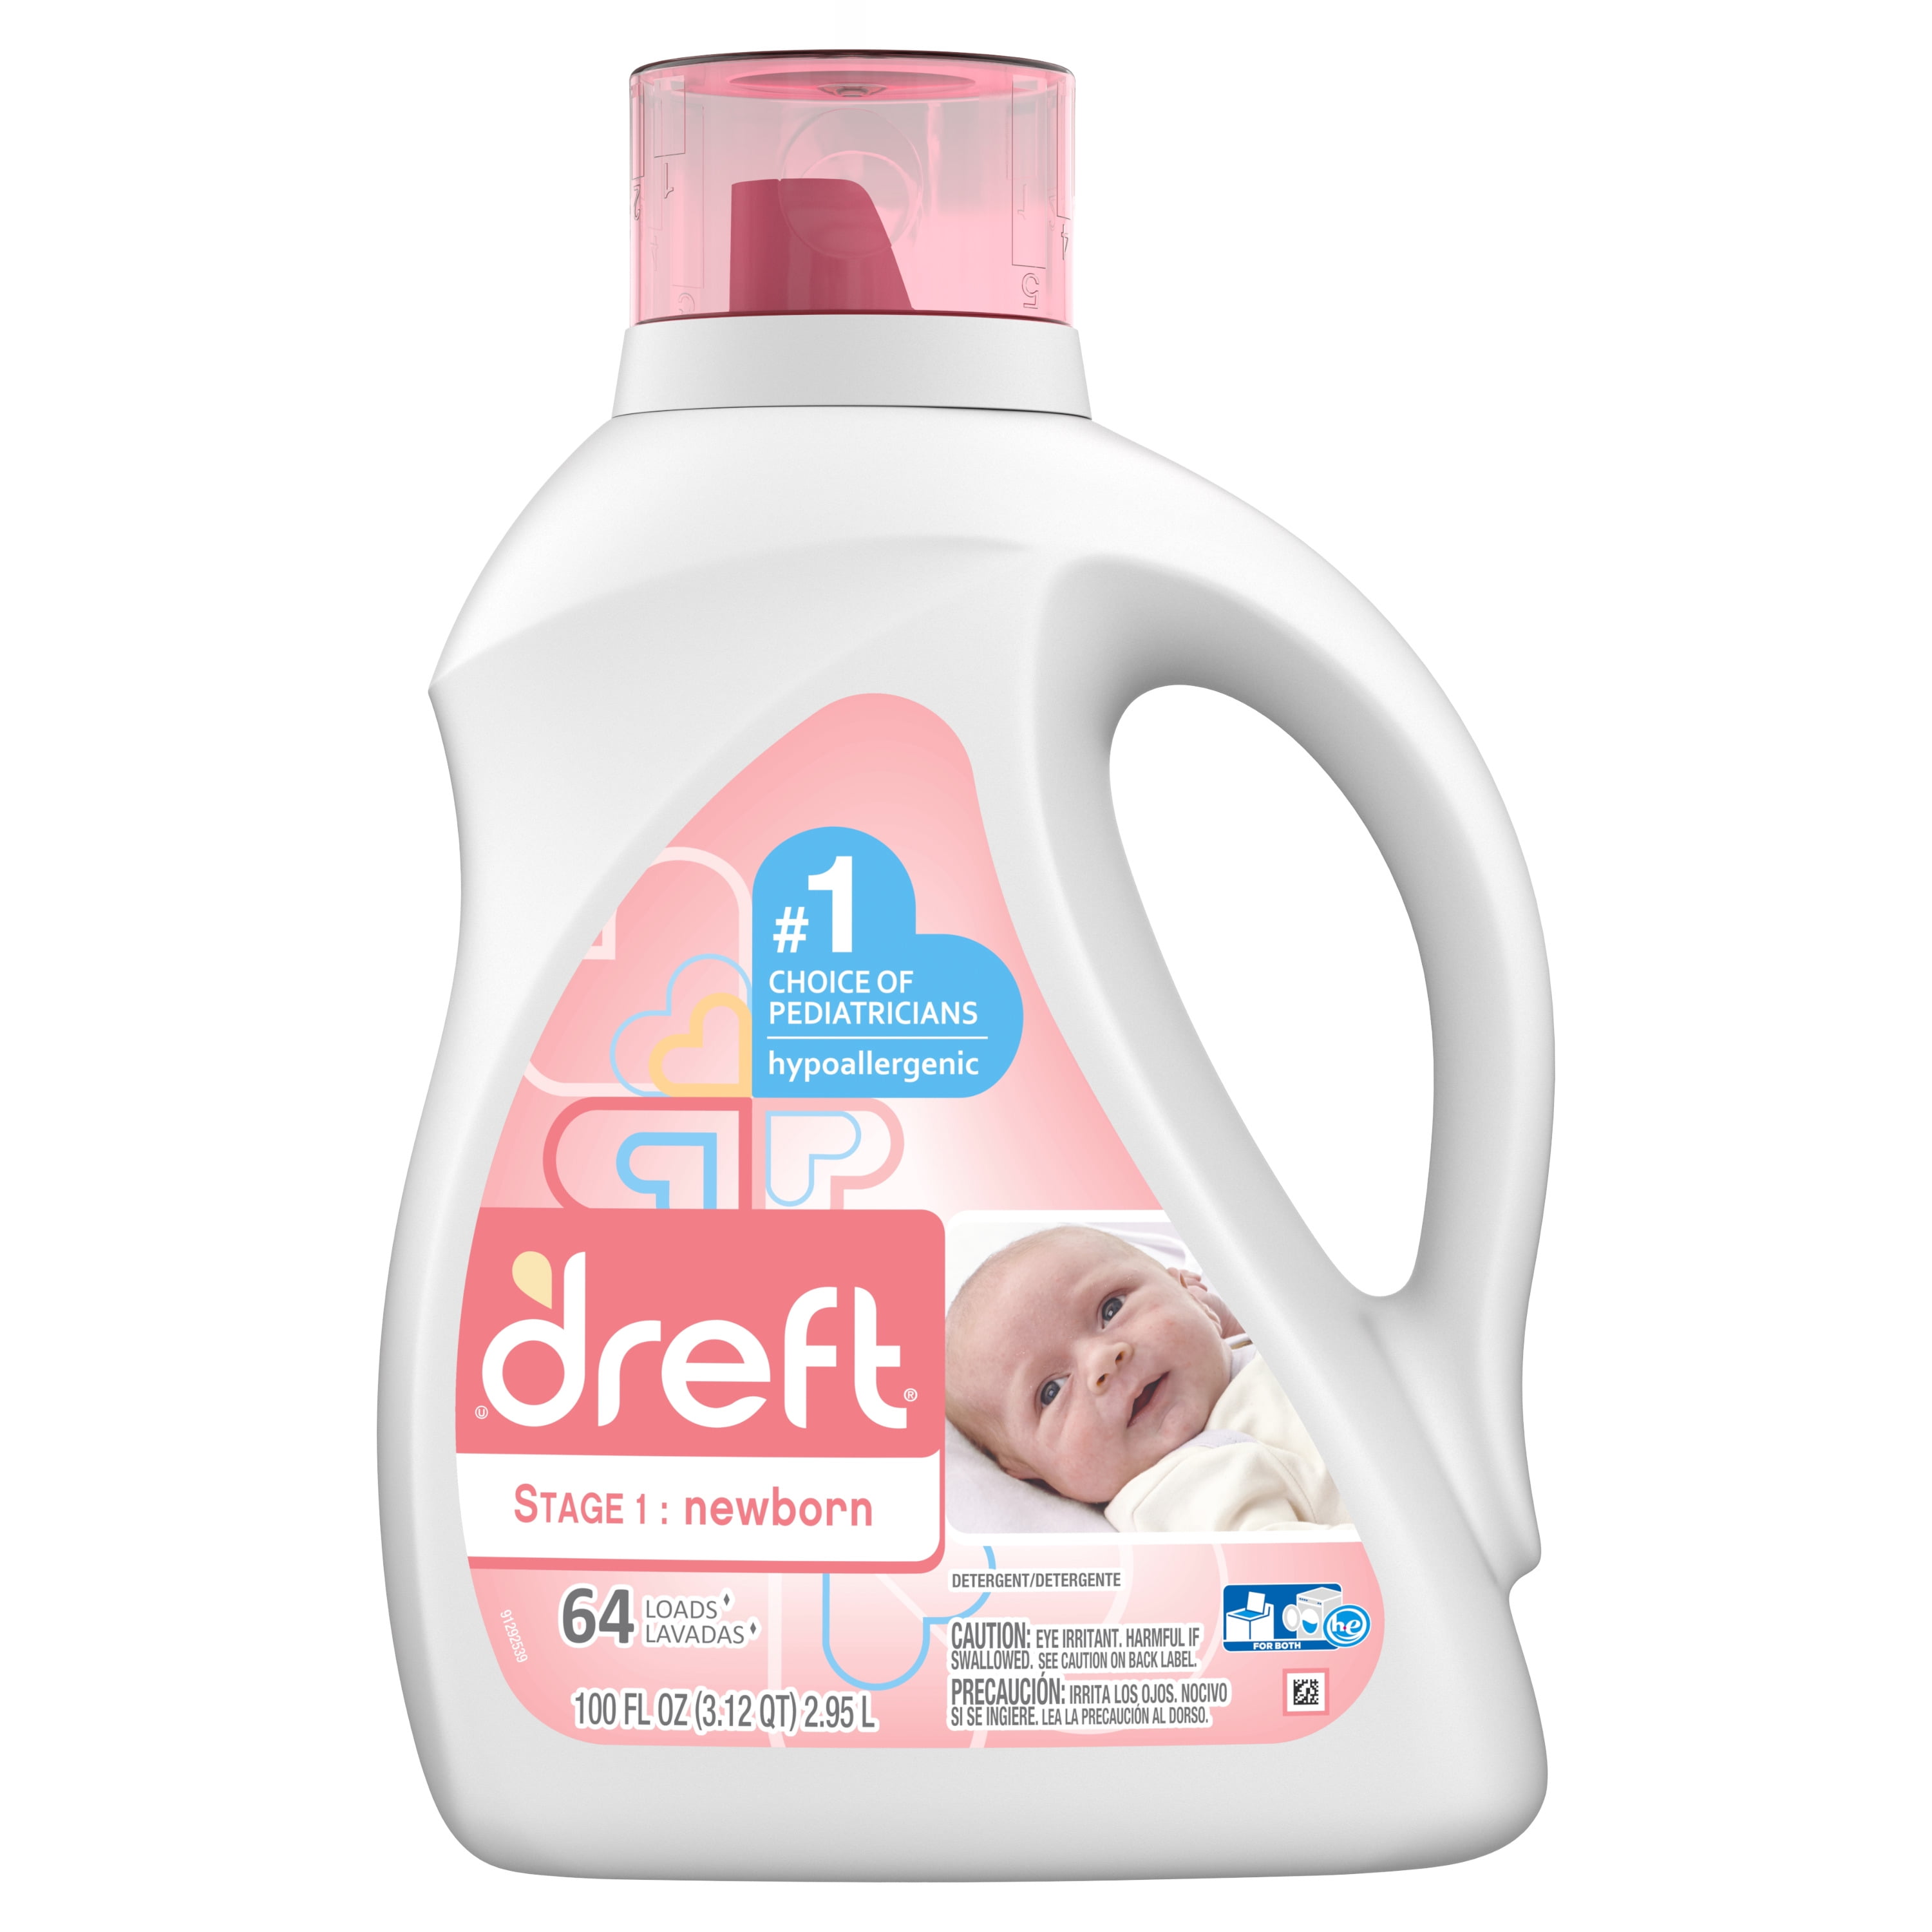 Does Dreft Get Stains Out